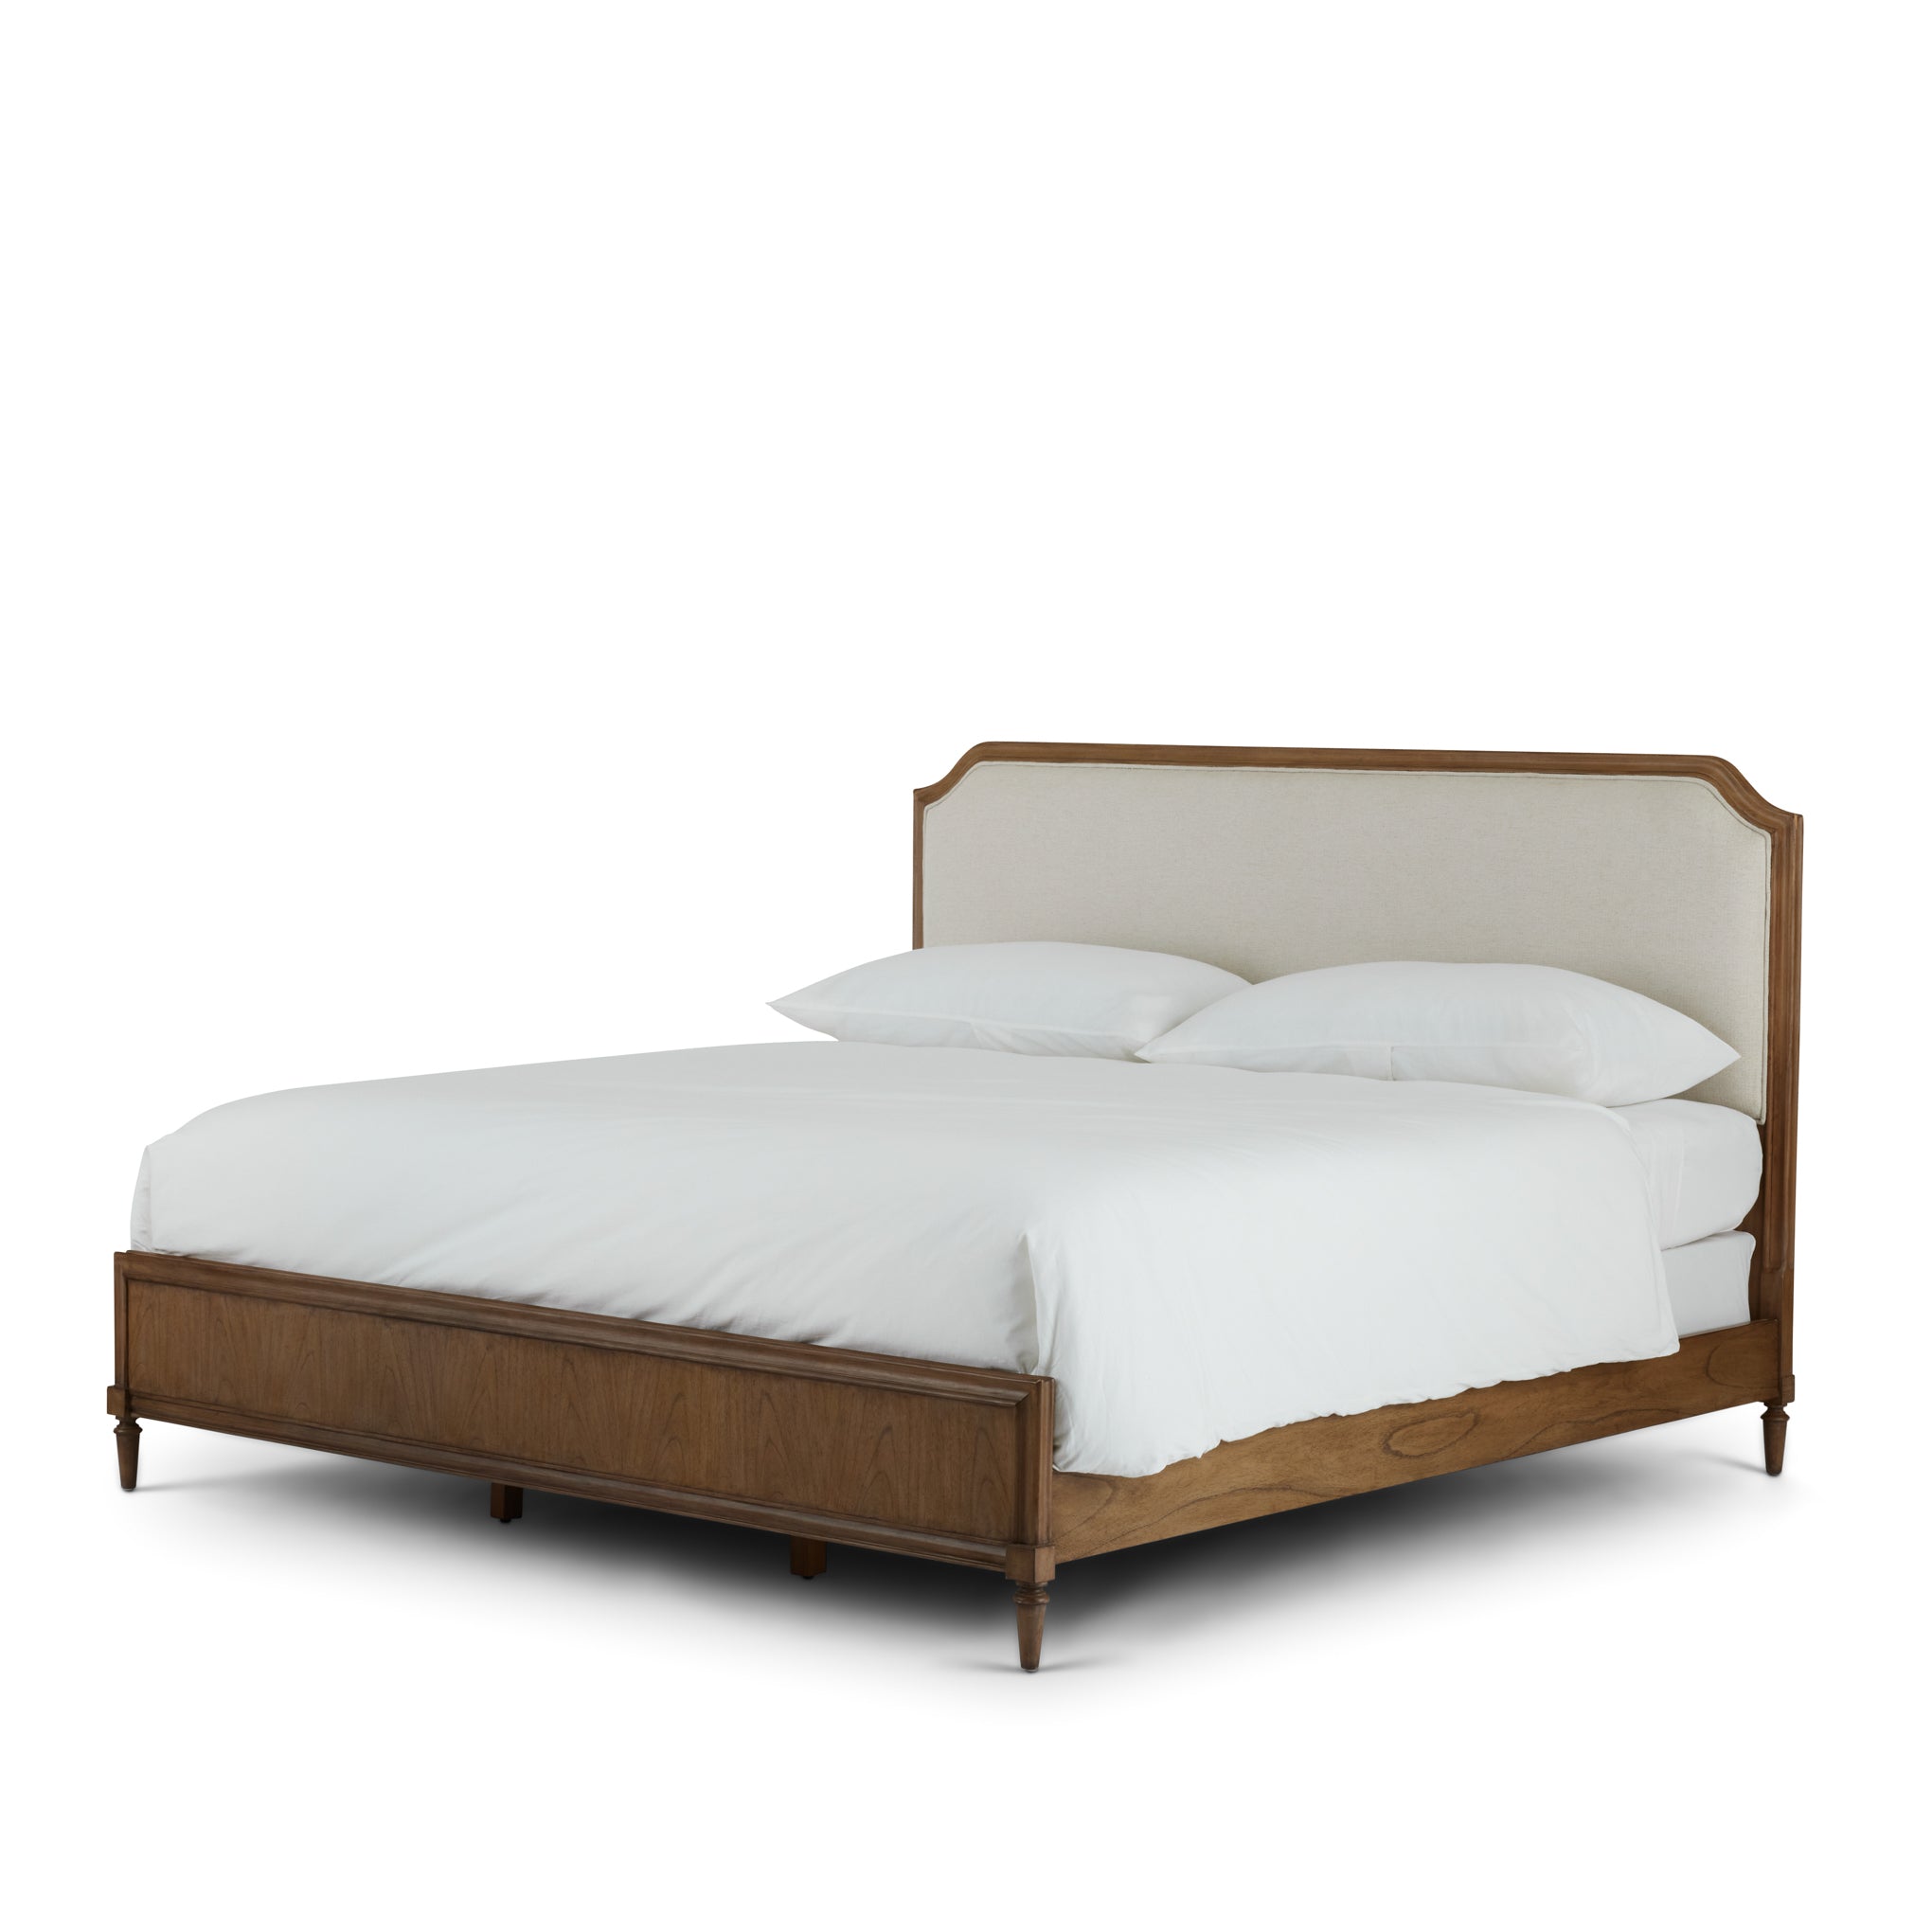 Corinne Upholstered Bed $1999.00